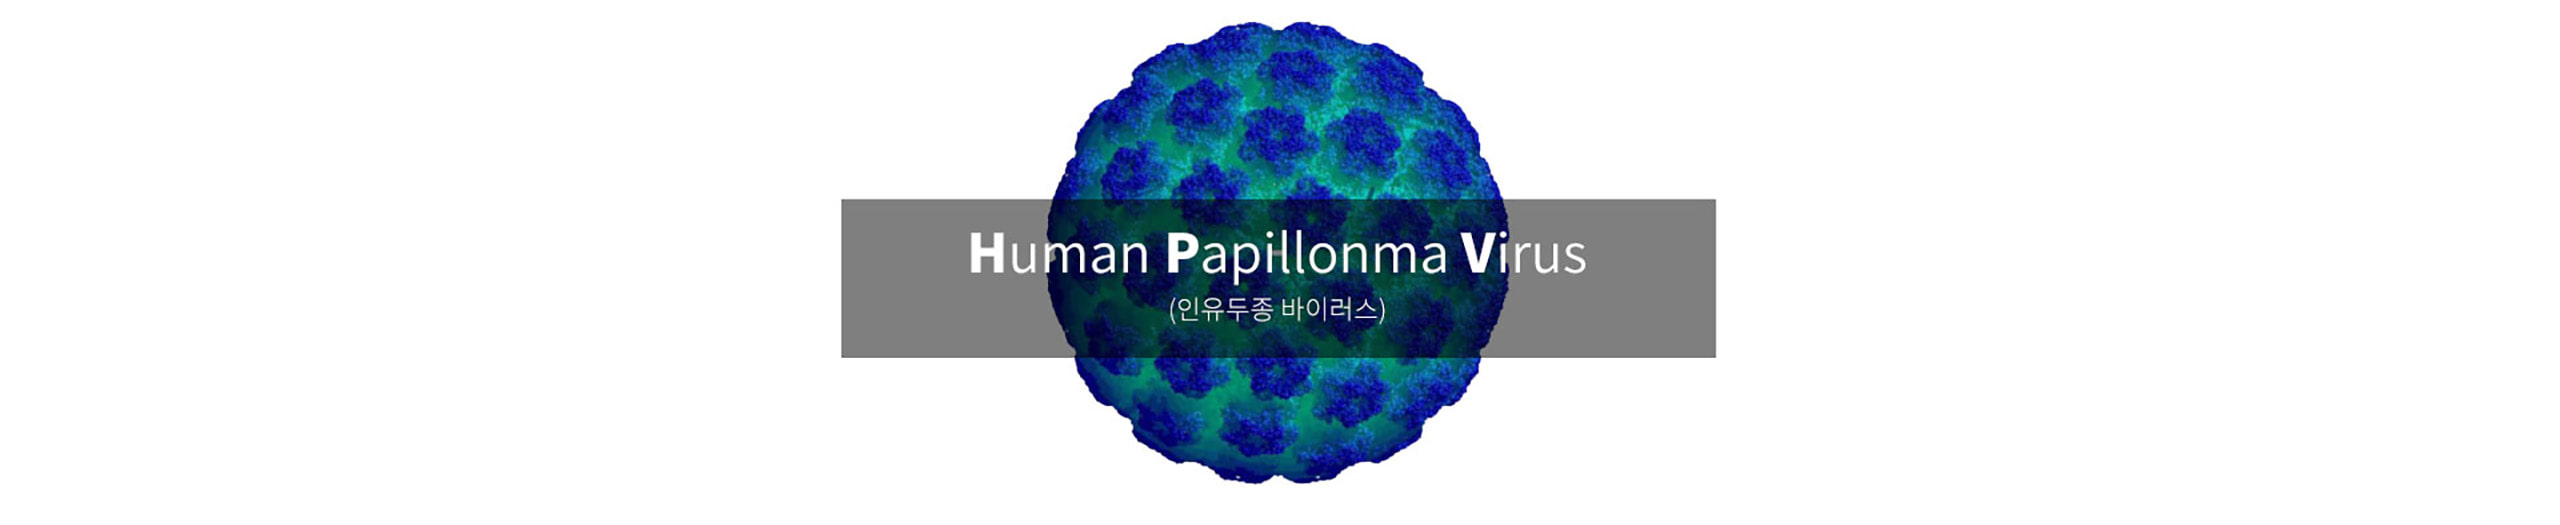 HPV picture|HPV 사진